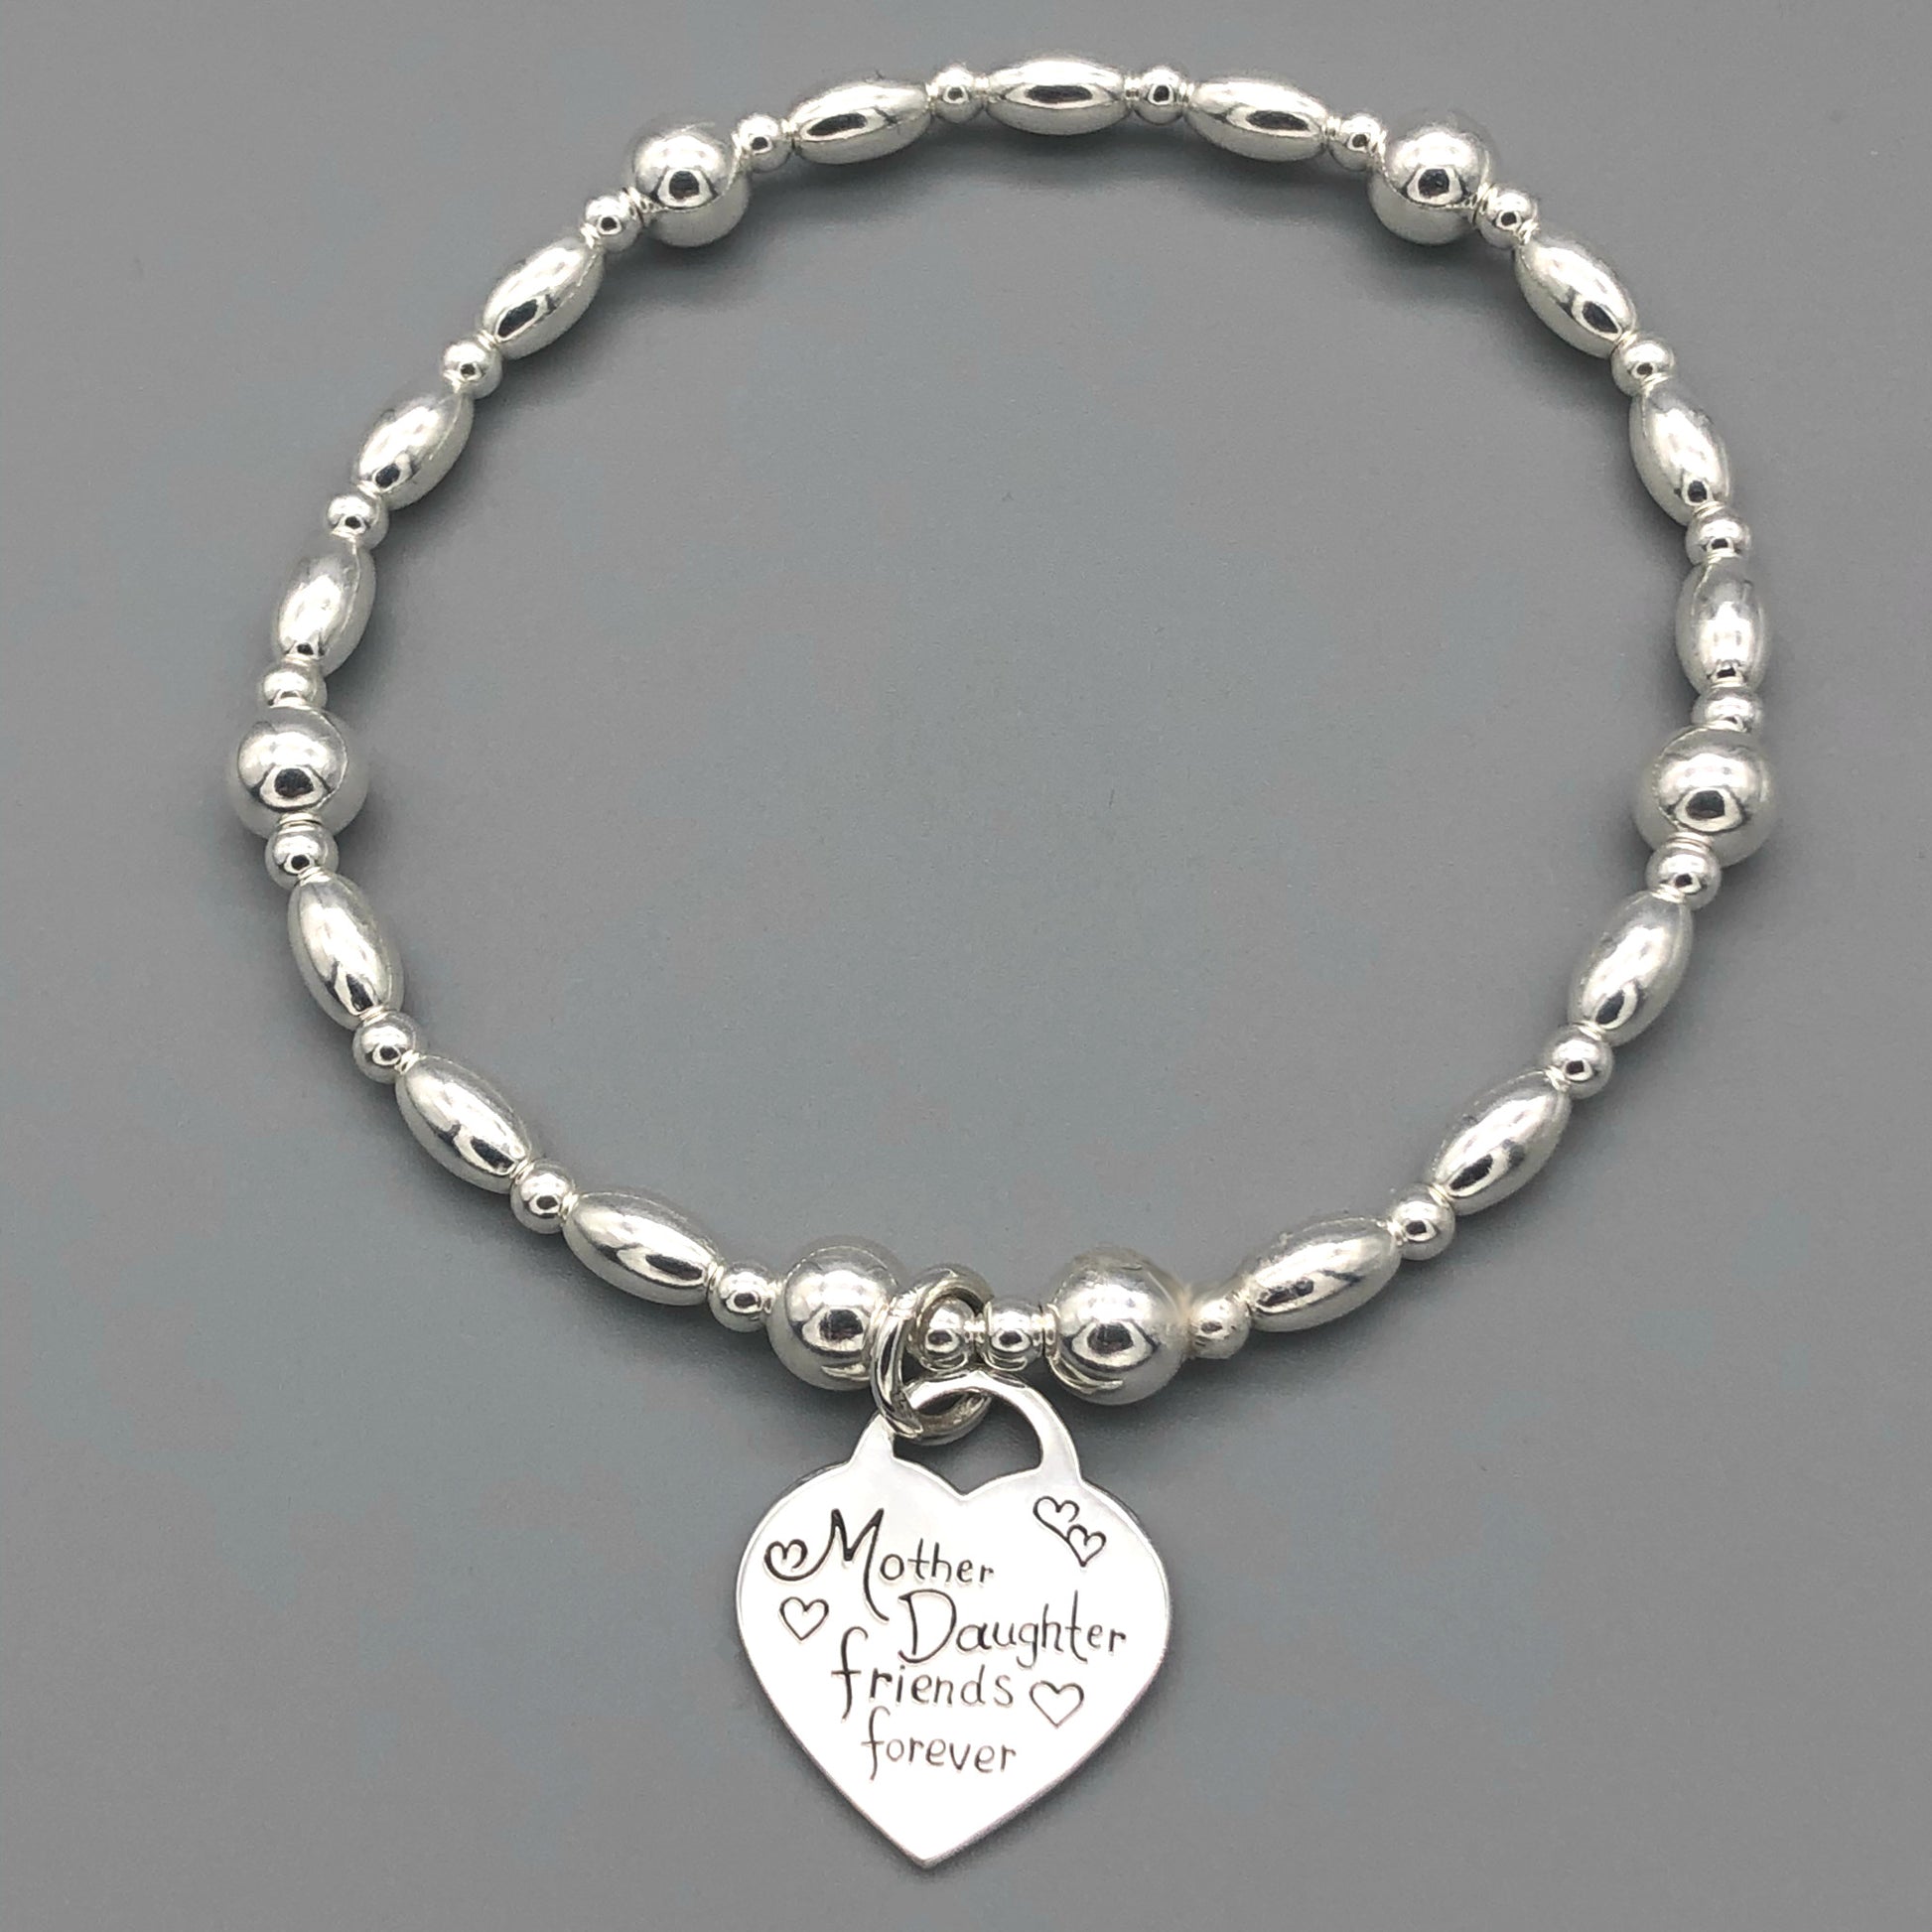 "Mother Daughter Friends Forever" charm women's hand-made sterling silver stacking bracelet by My Silver Wish